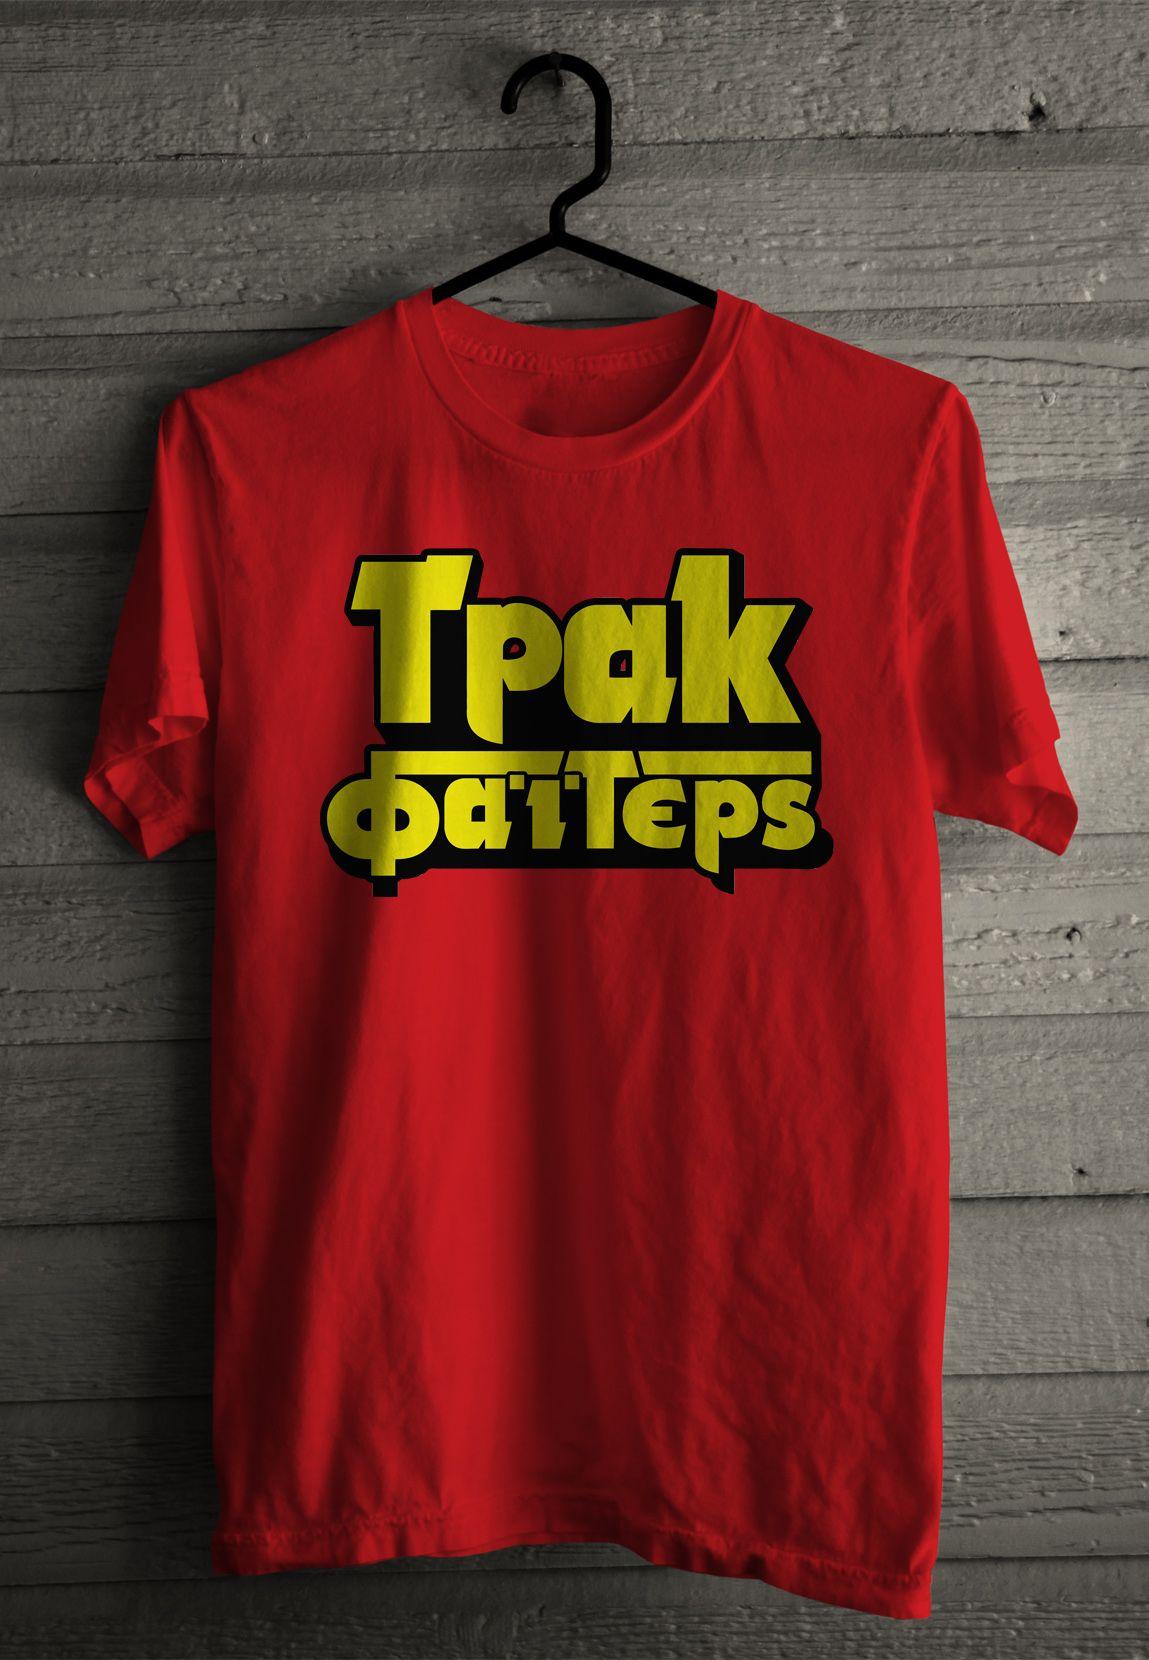 Greek Red Logo - Re-issue of “Hidden Treasures of Fuzz” and new shirt design “Greek ...